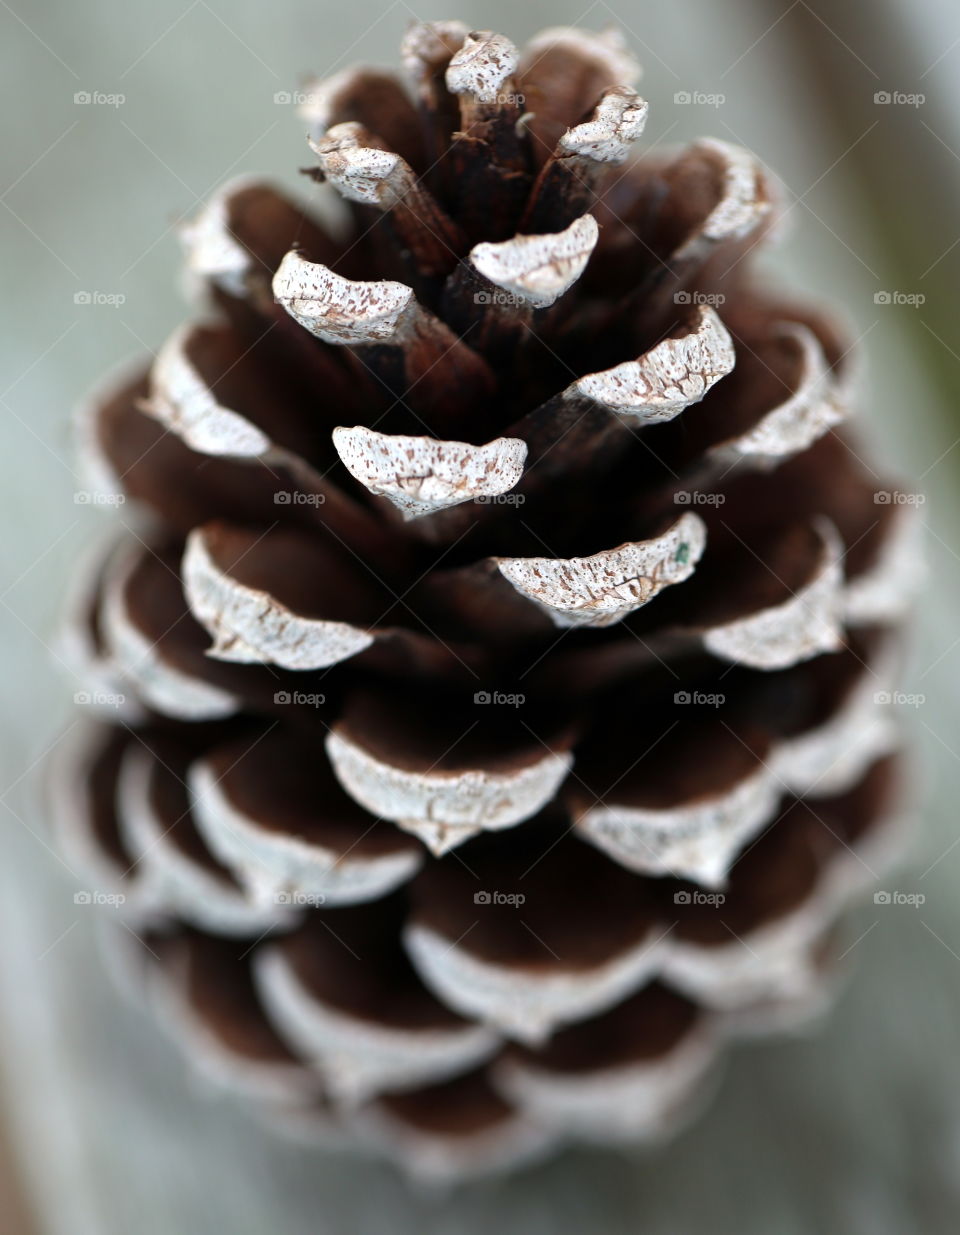 A view of pine cone from the side with great detail in macro setting